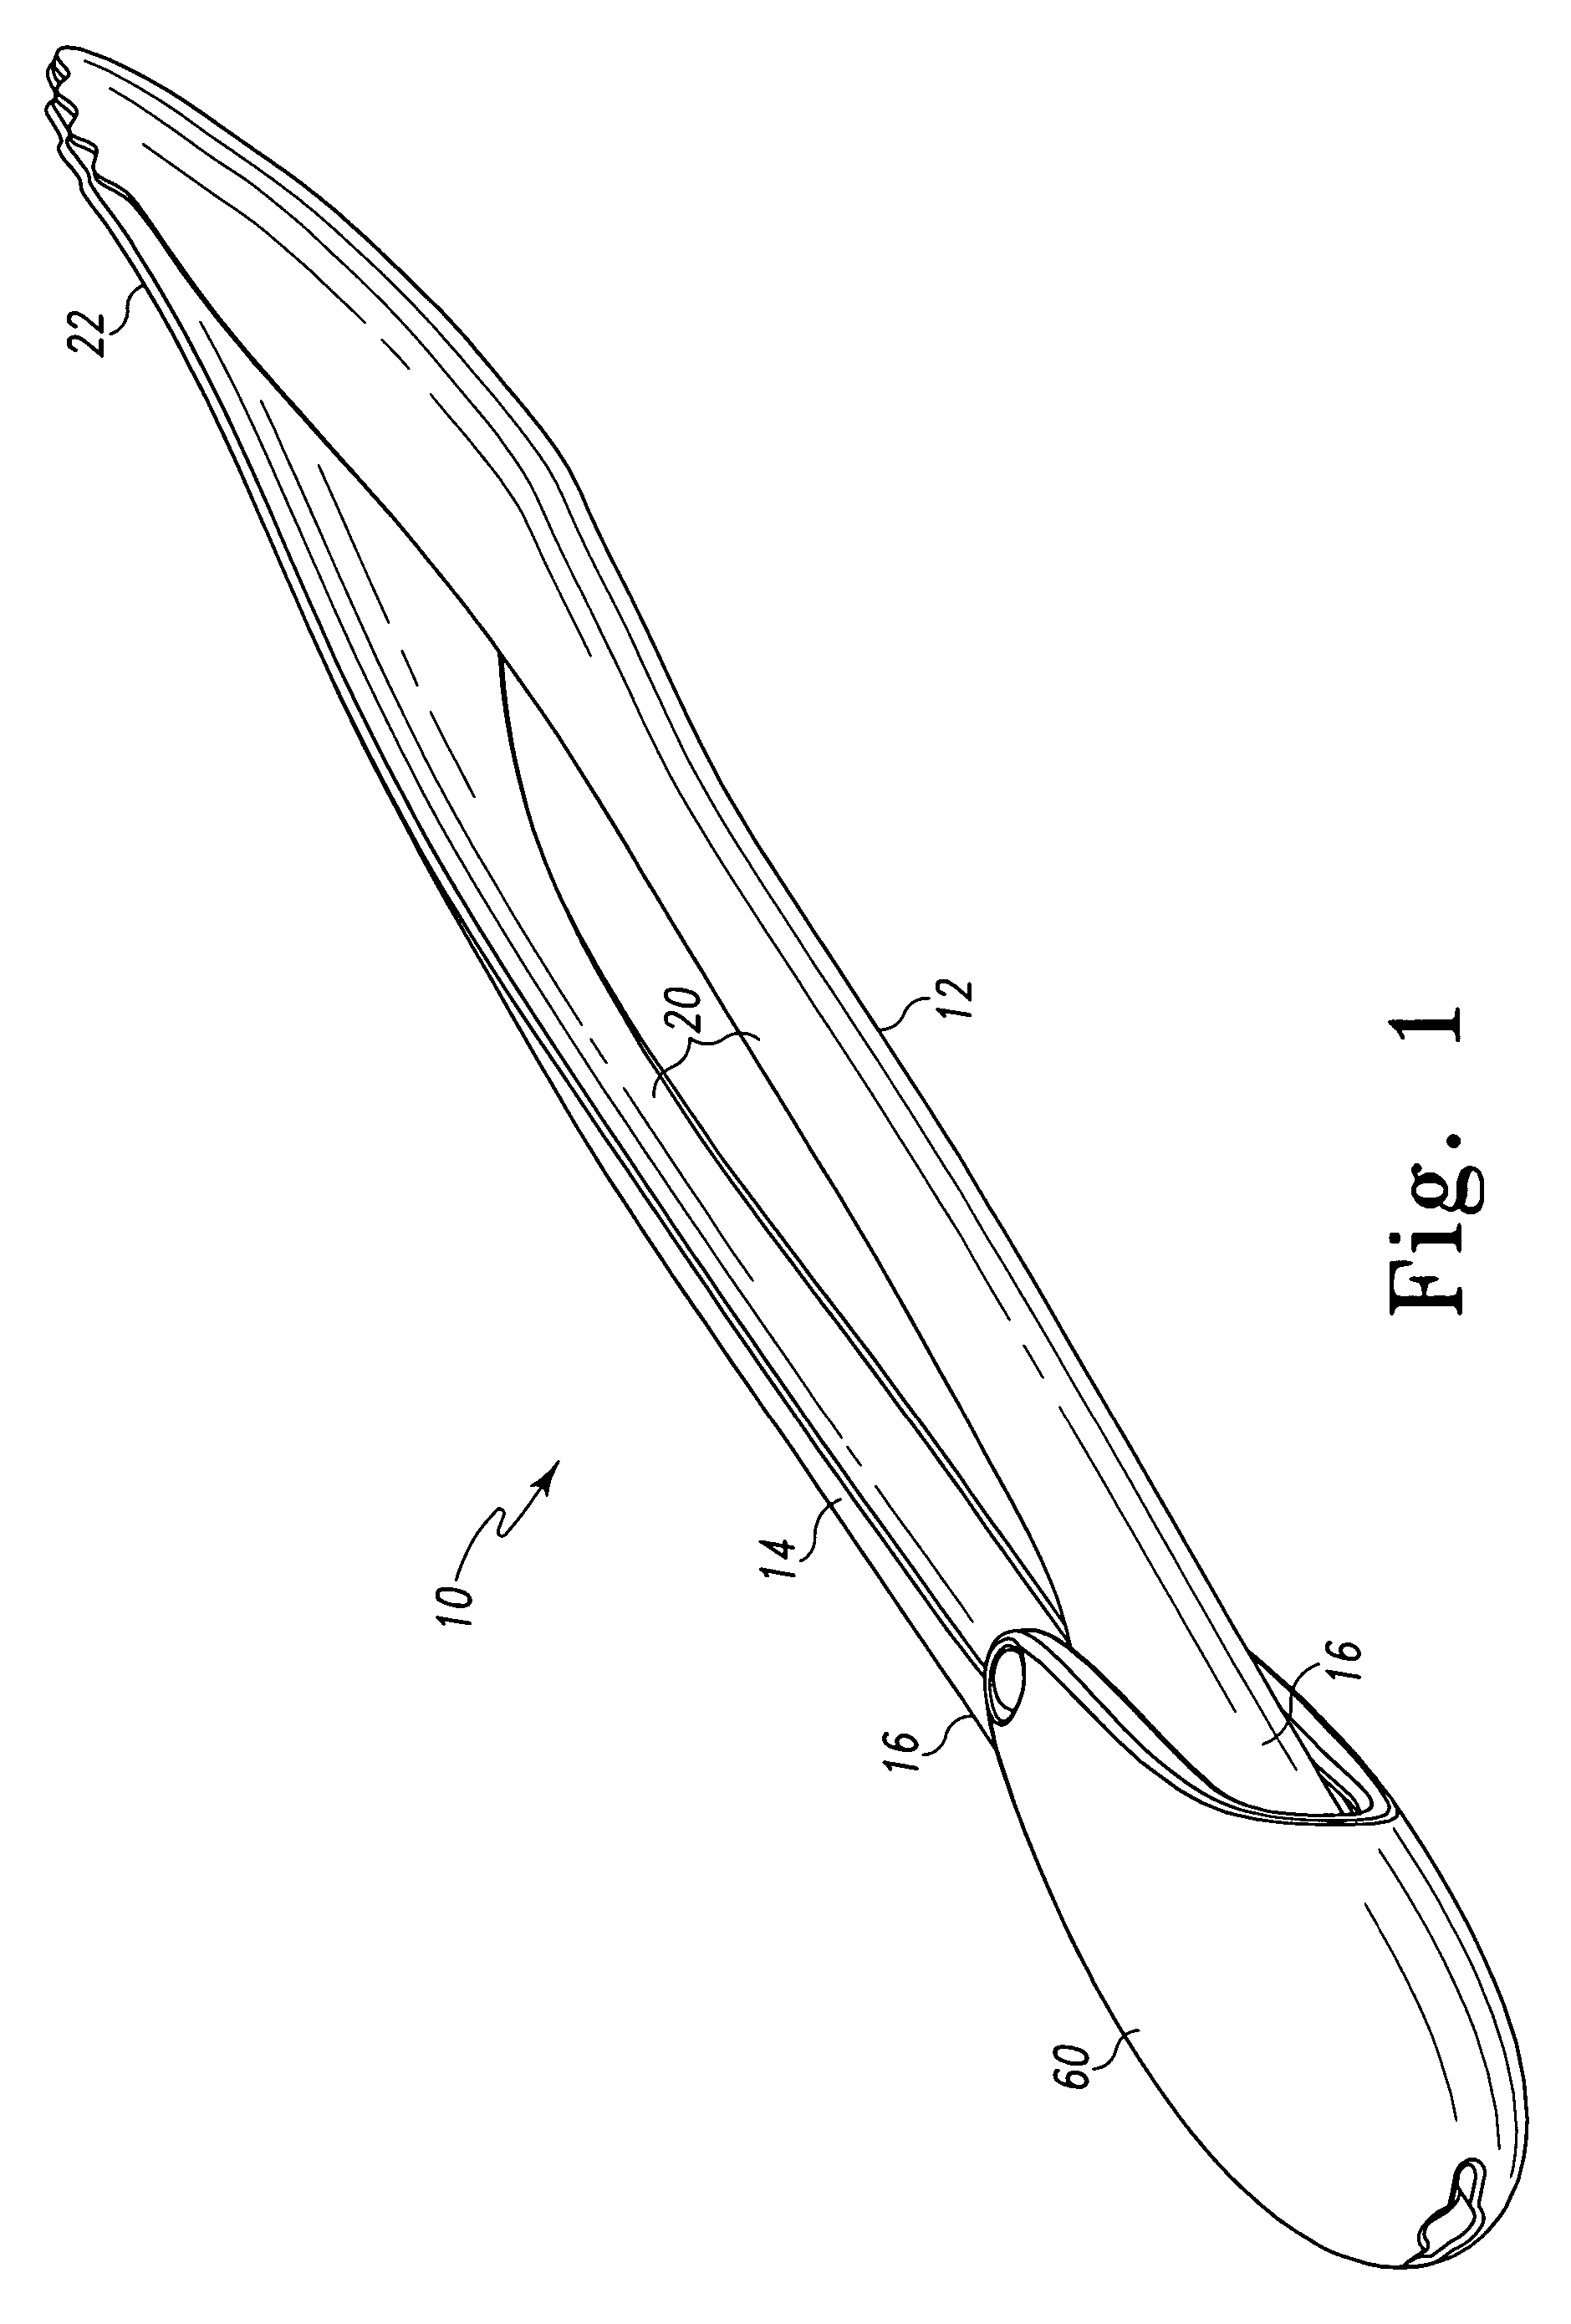 Tongs with encapsulated locking mechanism